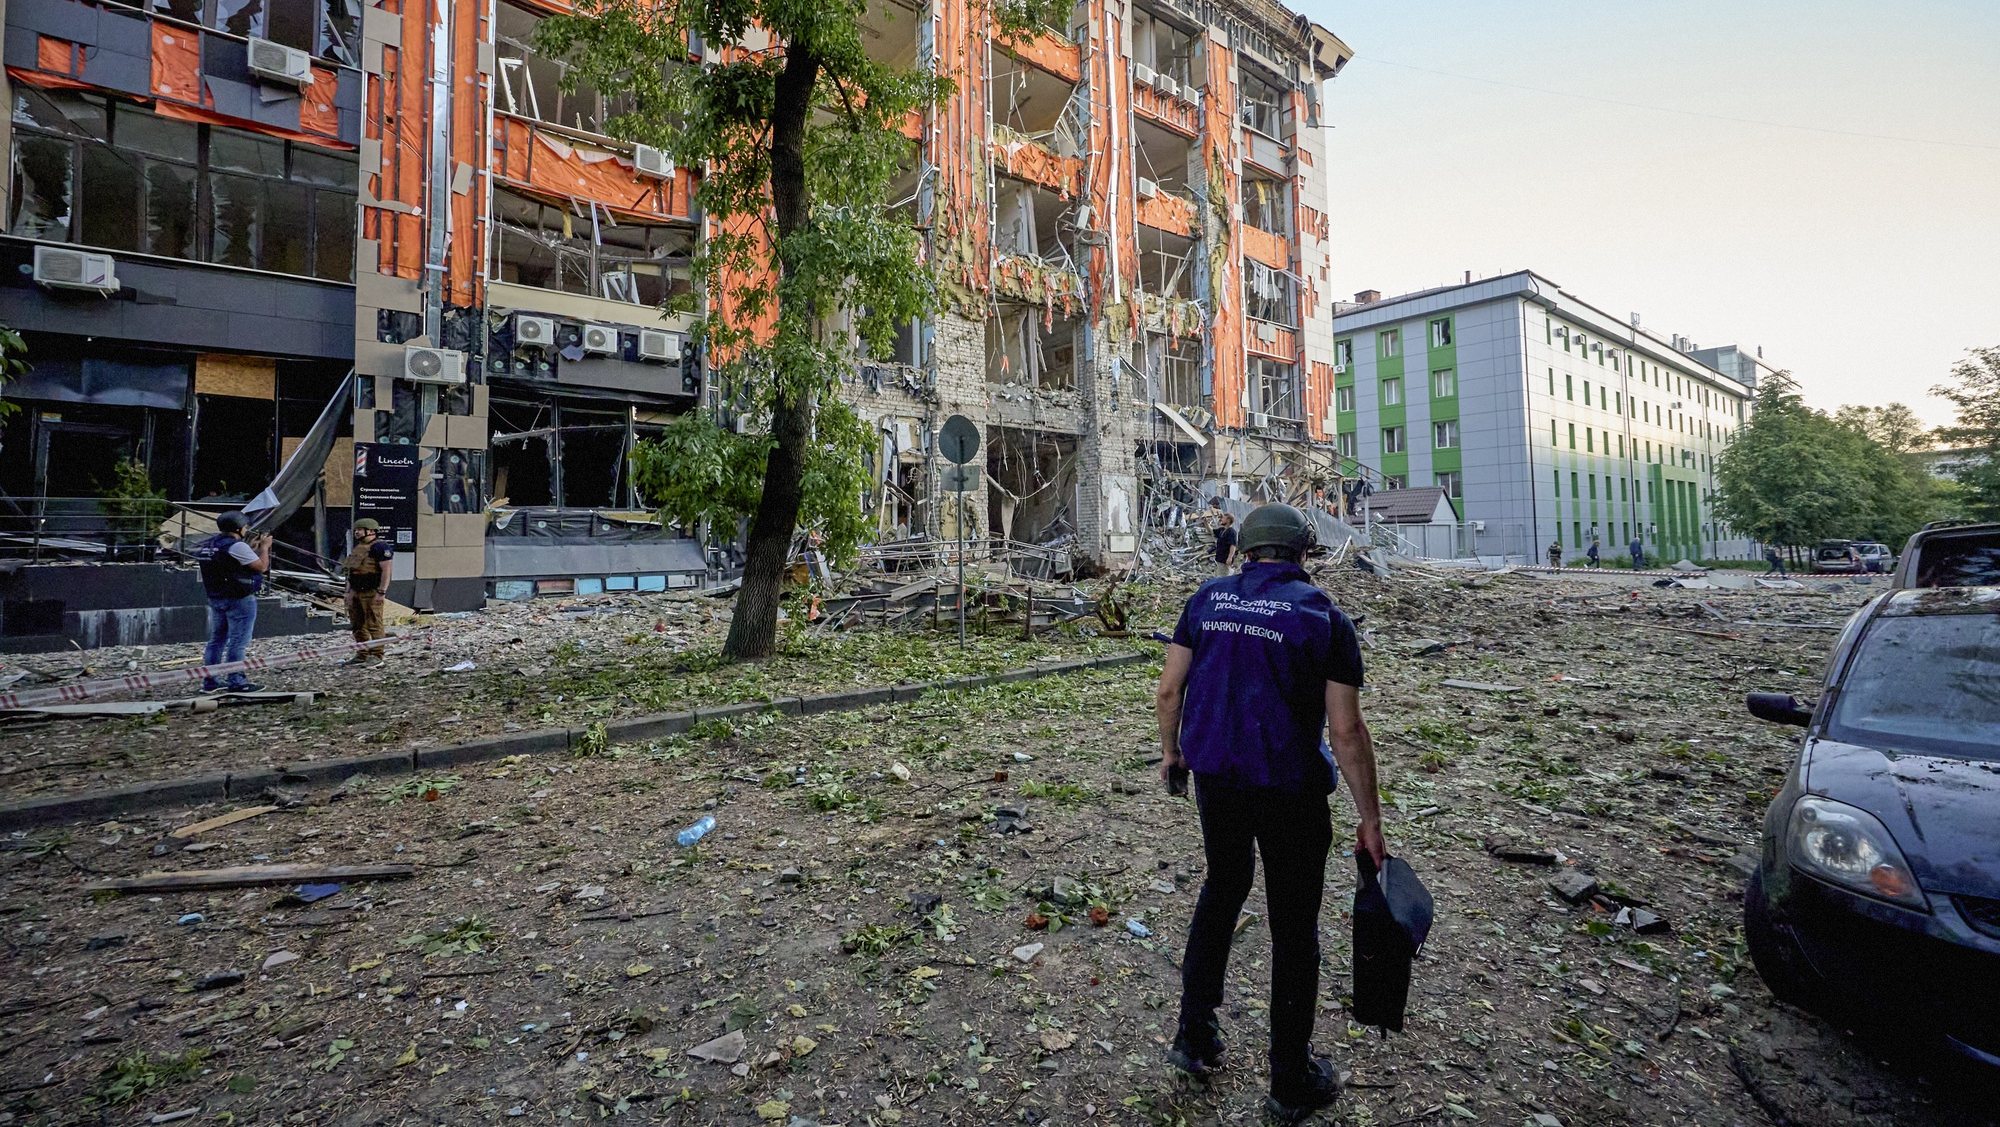 epa11370064 A war crimes prosecutor works at the site of shelling of a residential area in Kharkiv,  Ukraine, 25 May 2024 amid the Russian invasion. Kharkiv has been under massive rocket and glide-bomb attack during all day on May 25. At least 6 people died, 16 people are currently missing, and 33 were wounded in the glide-bombs attack on a hypermarket in Kharkiv today. Also, 18 people bounded in result of residential area shelling according to the report of the head of the Kharkiv Military Administration Oleg Synegubov. Russian troops entered Ukrainian territory on 24 February 2022, starting a conflict that has provoked destruction and a humanitarian crisis.  EPA/SERGEY KOZLOV 53533